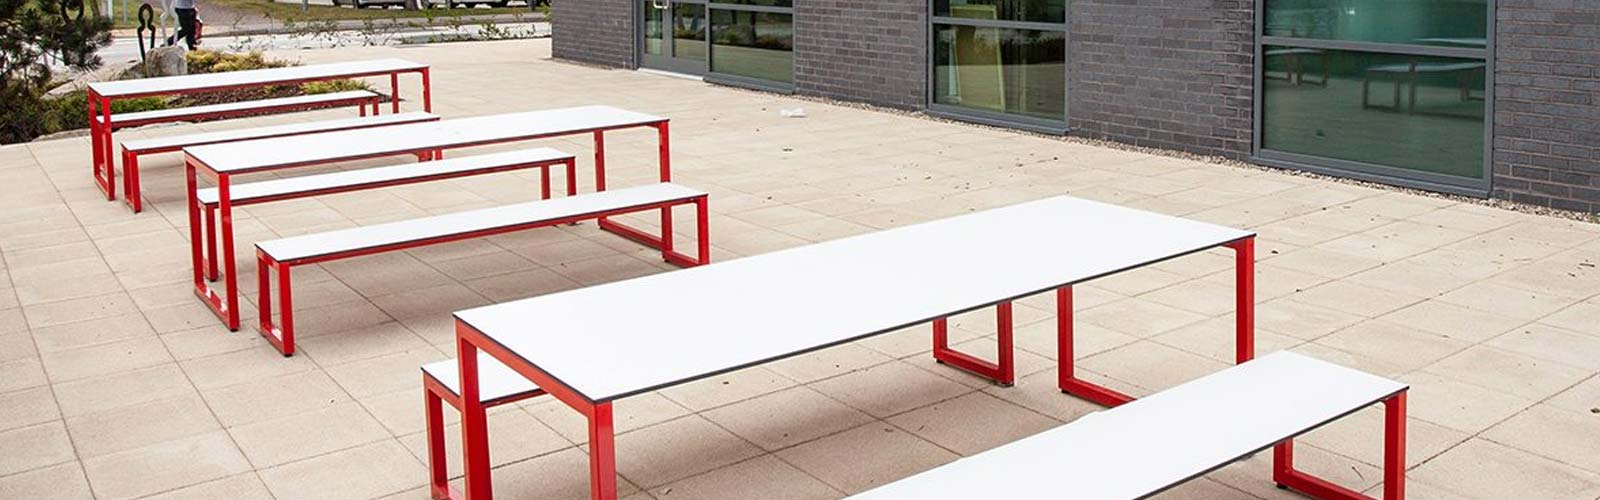 Outdoor office furniture from Frovi